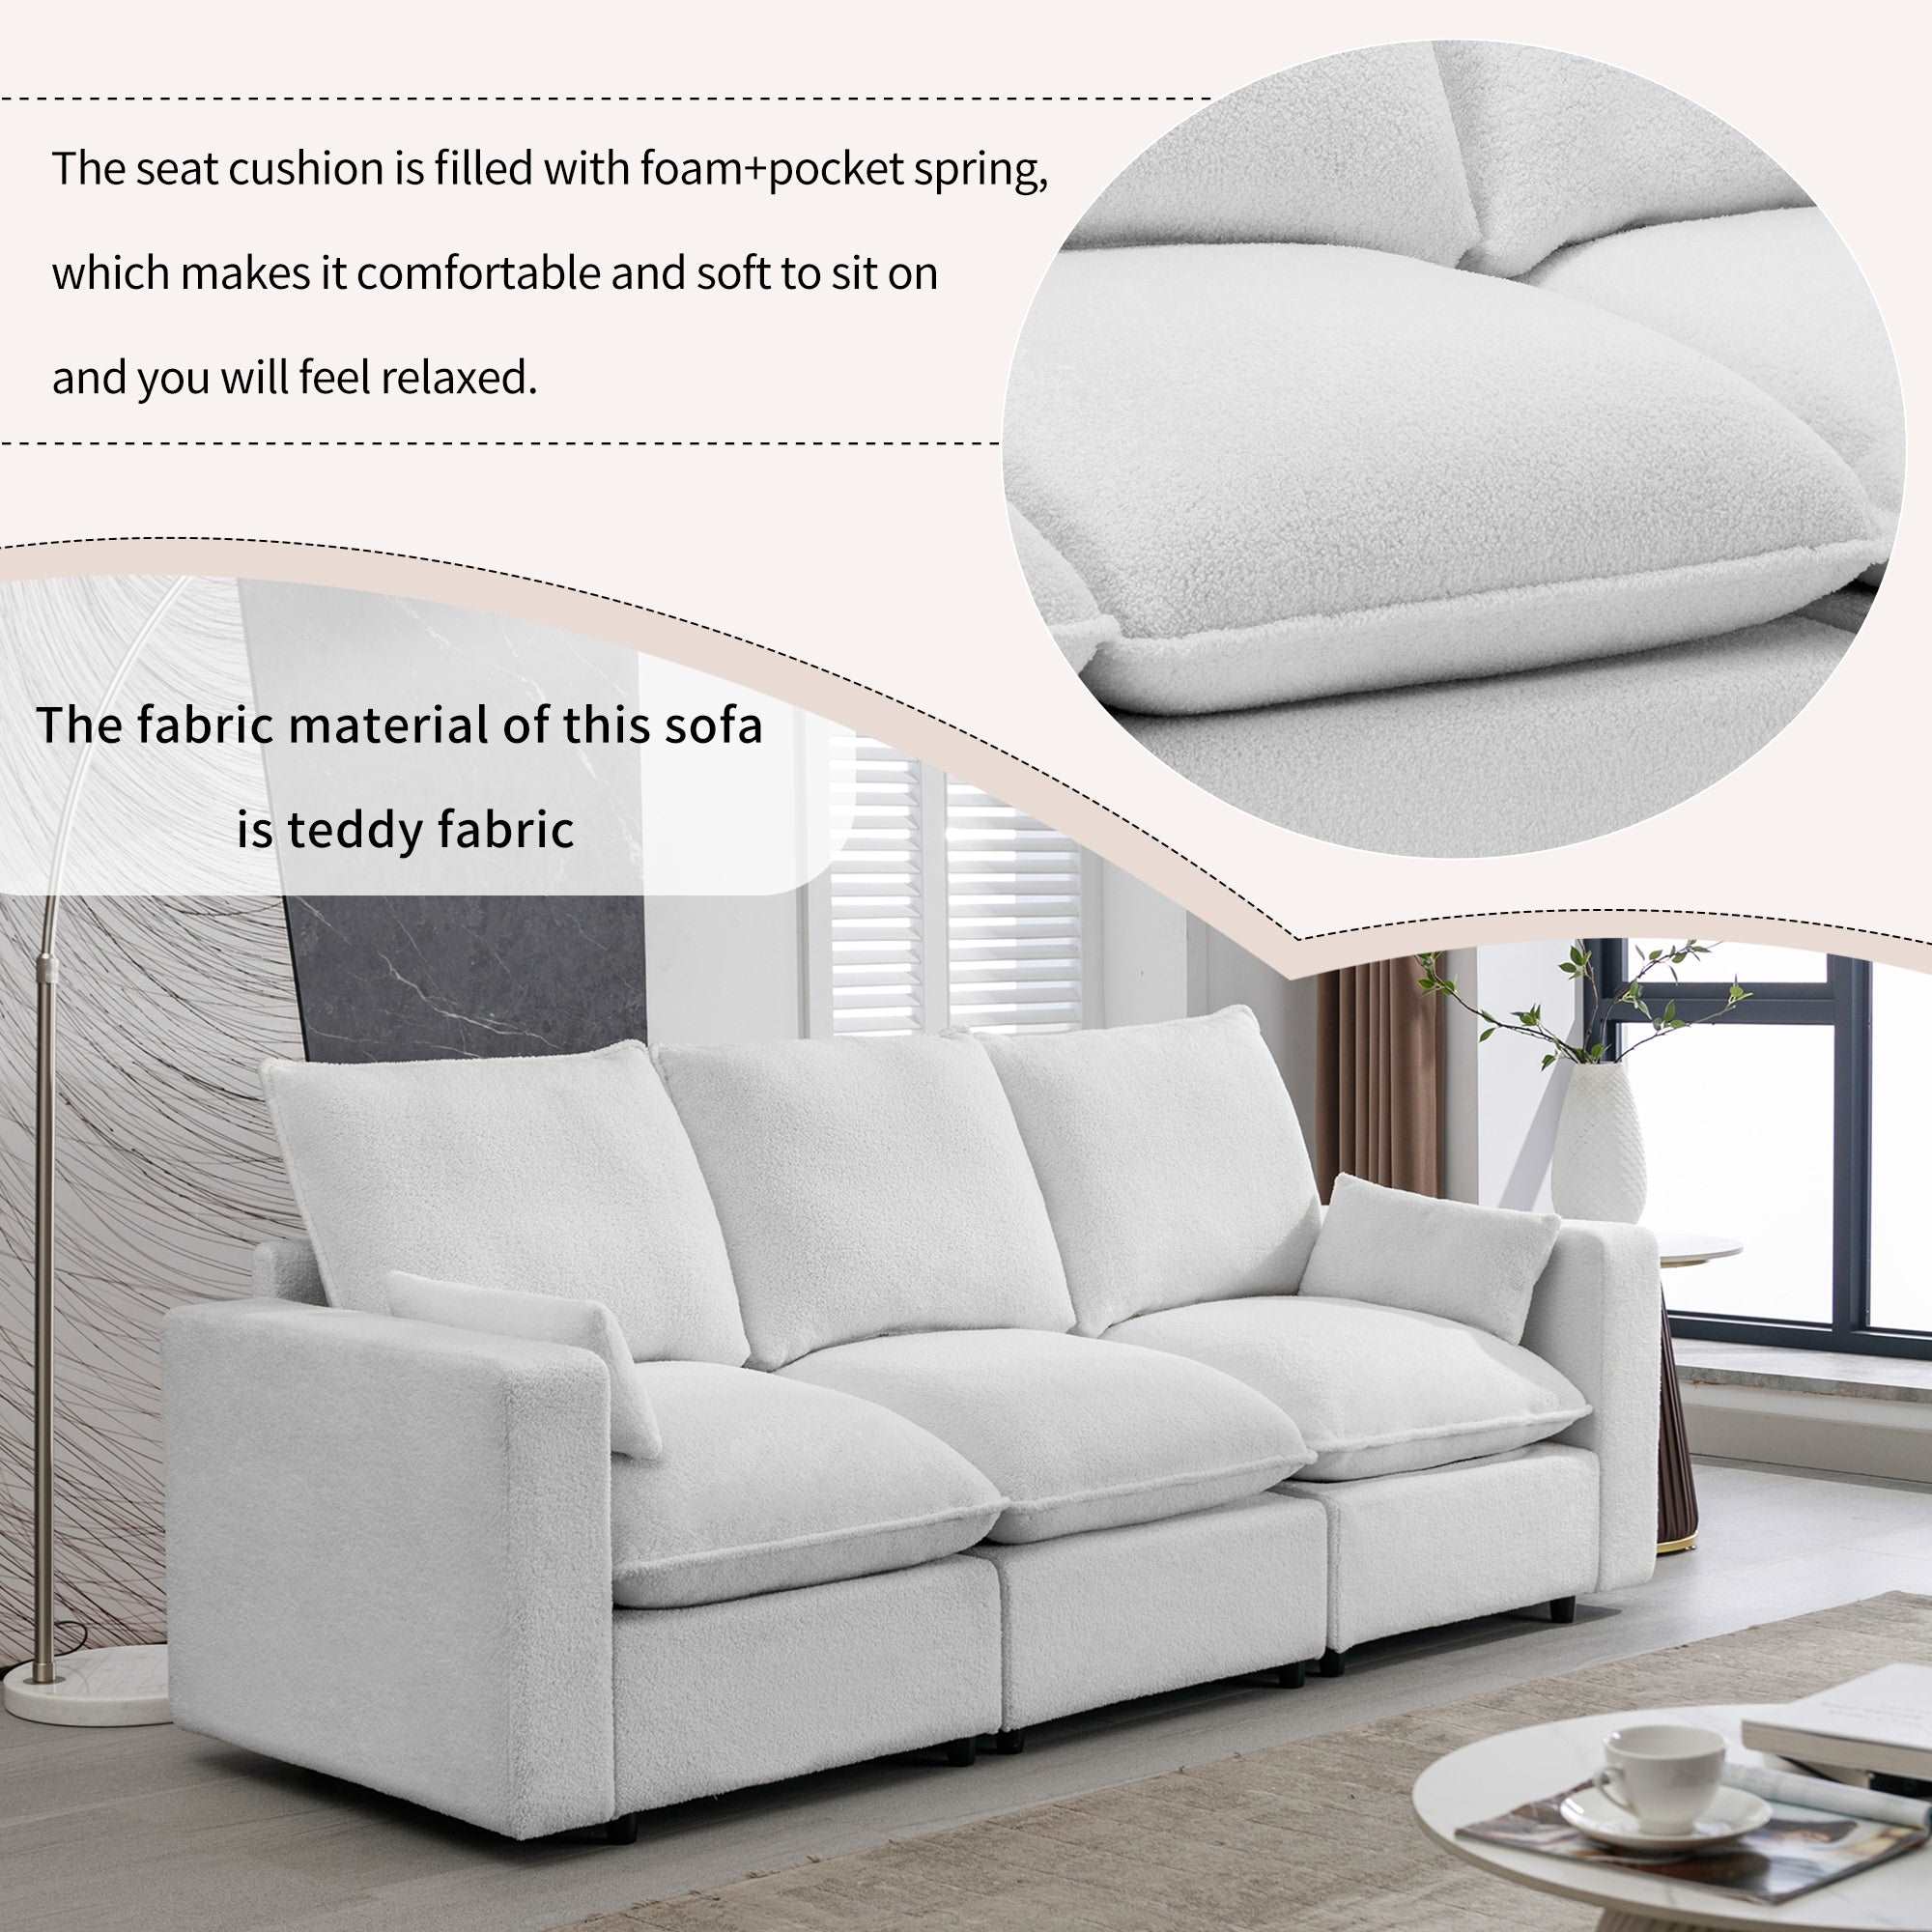 Bellemave 87.7" Teddy Fabric 3 Seat Sofa with Removable Back and Seat Cushions and 2 pillows